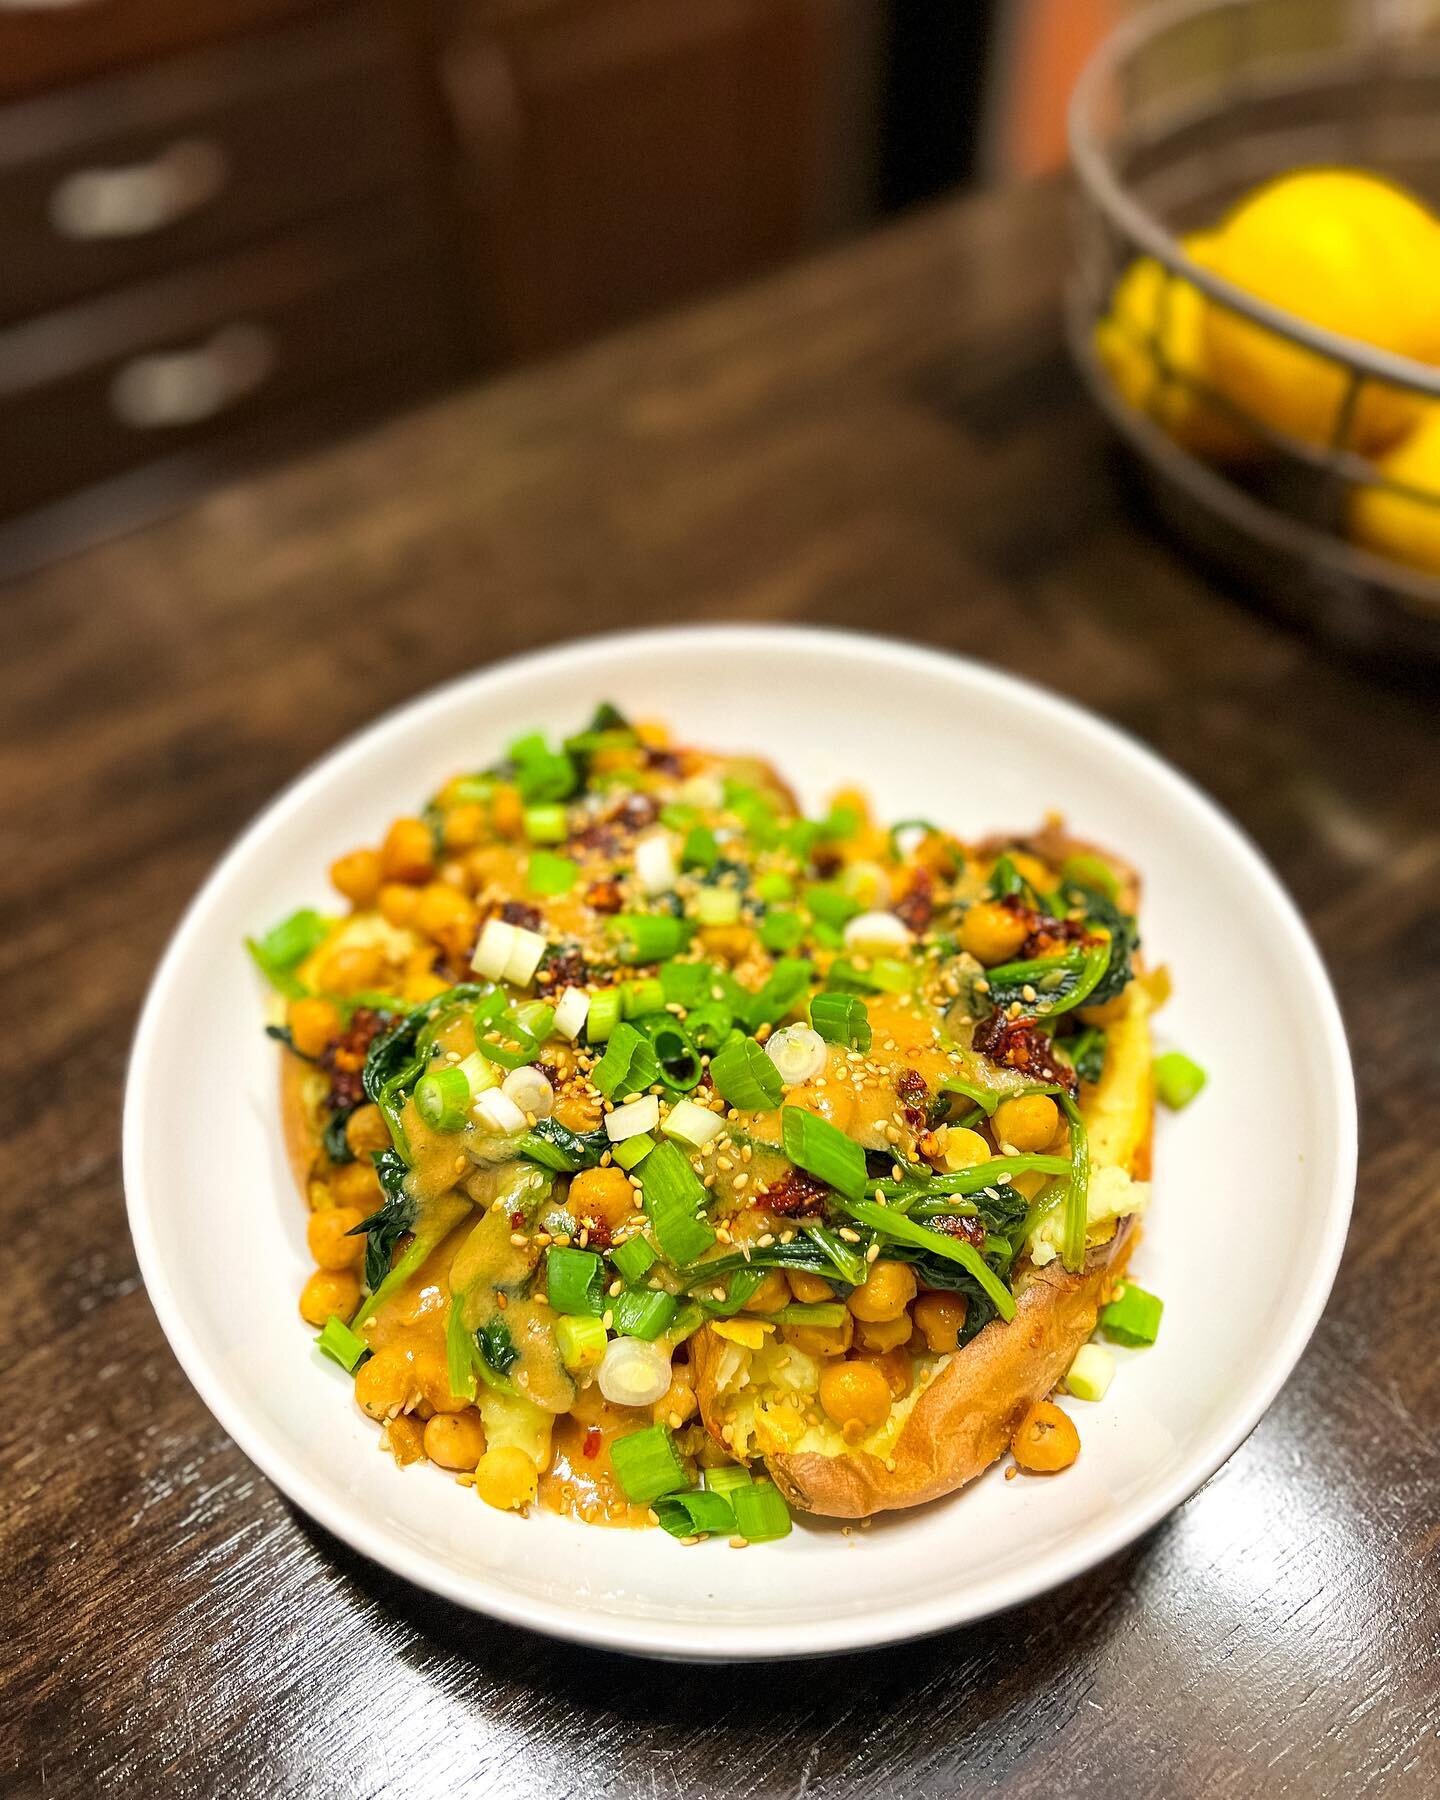 Sweet potatoes with tahini butter chickpeas. 

I saw this recipe online and just had to give it a go. It's such an interesting take on a meatless dinner.

The dressing has tahini, lemon juice and maple syrup, which is perfectly balanced with a genero